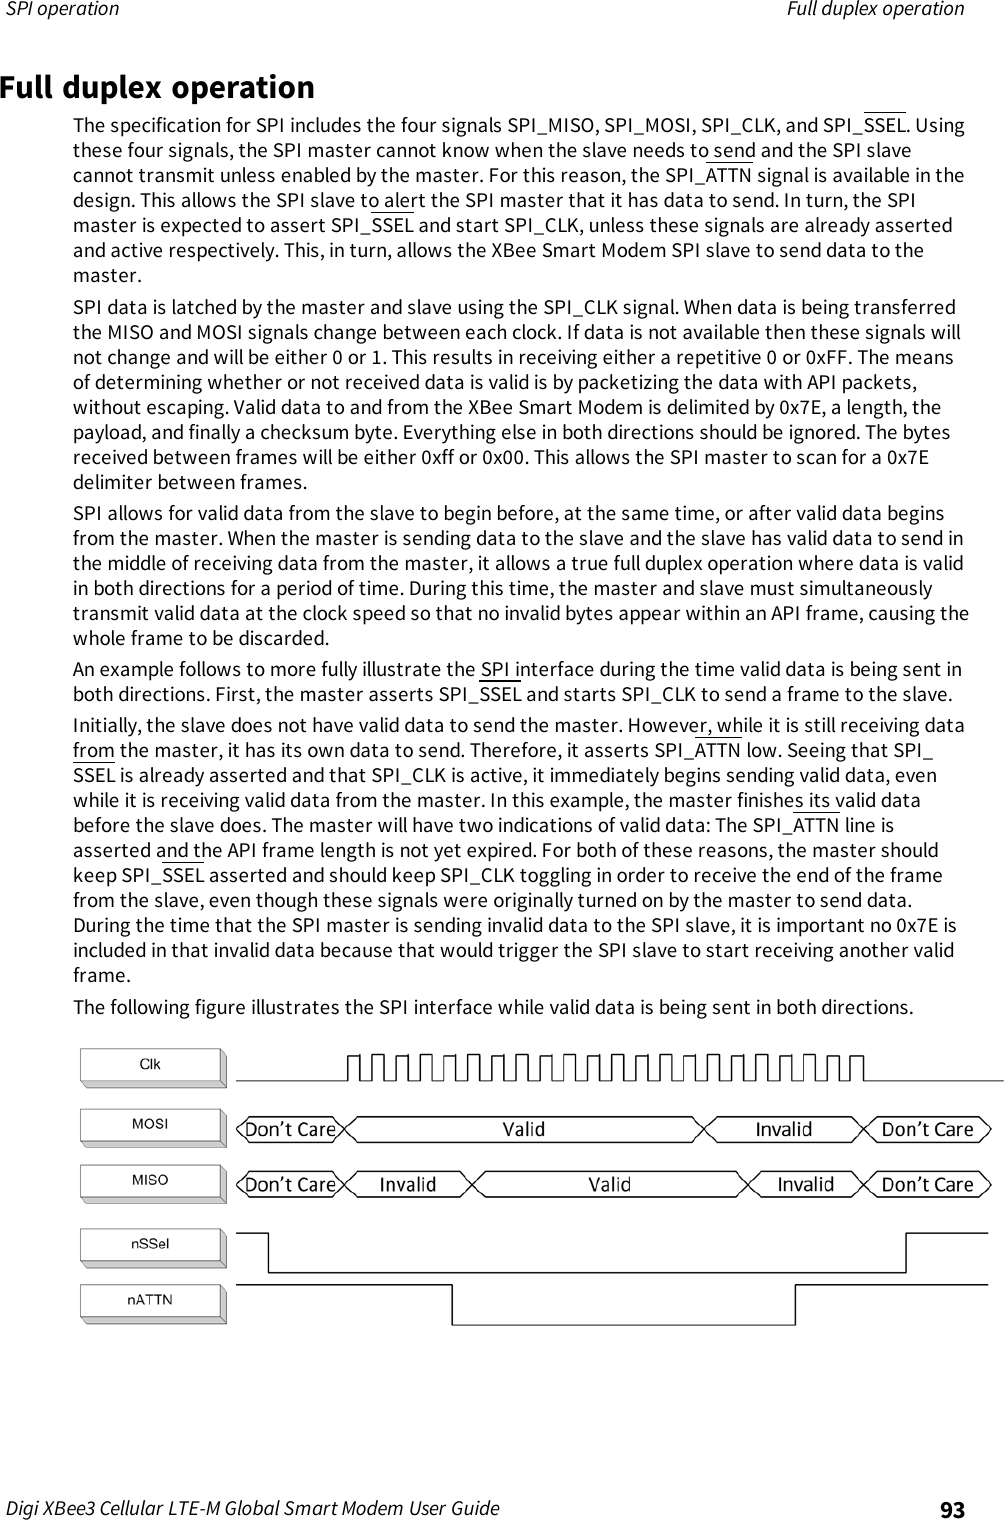 Page 93 of Digi XB3M1 XBee3 Cellular LTE-M User Manual 